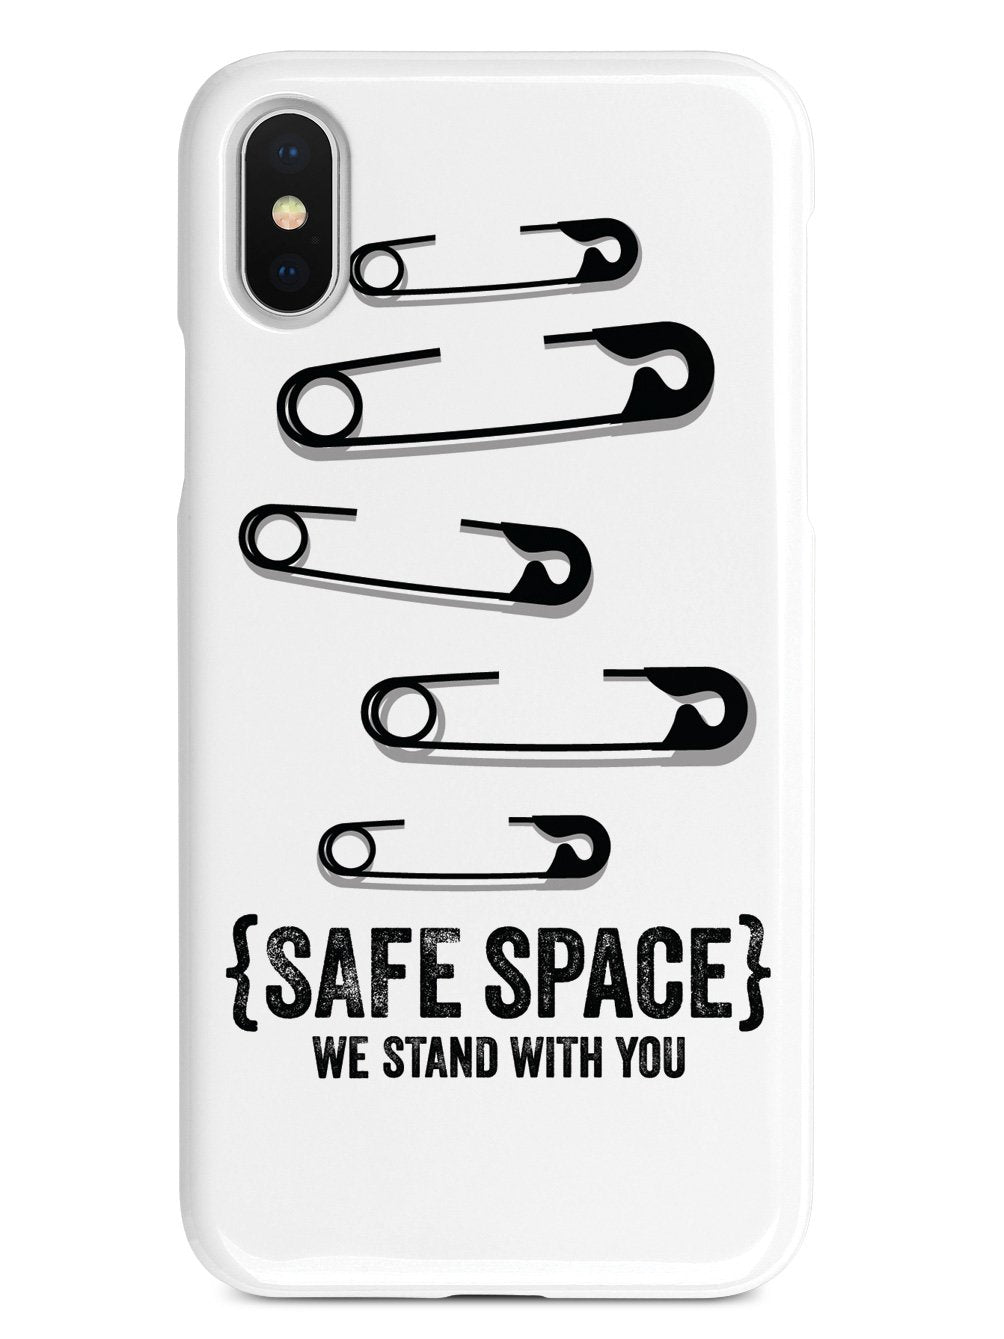 Safe Space - We Stand With You - White Case